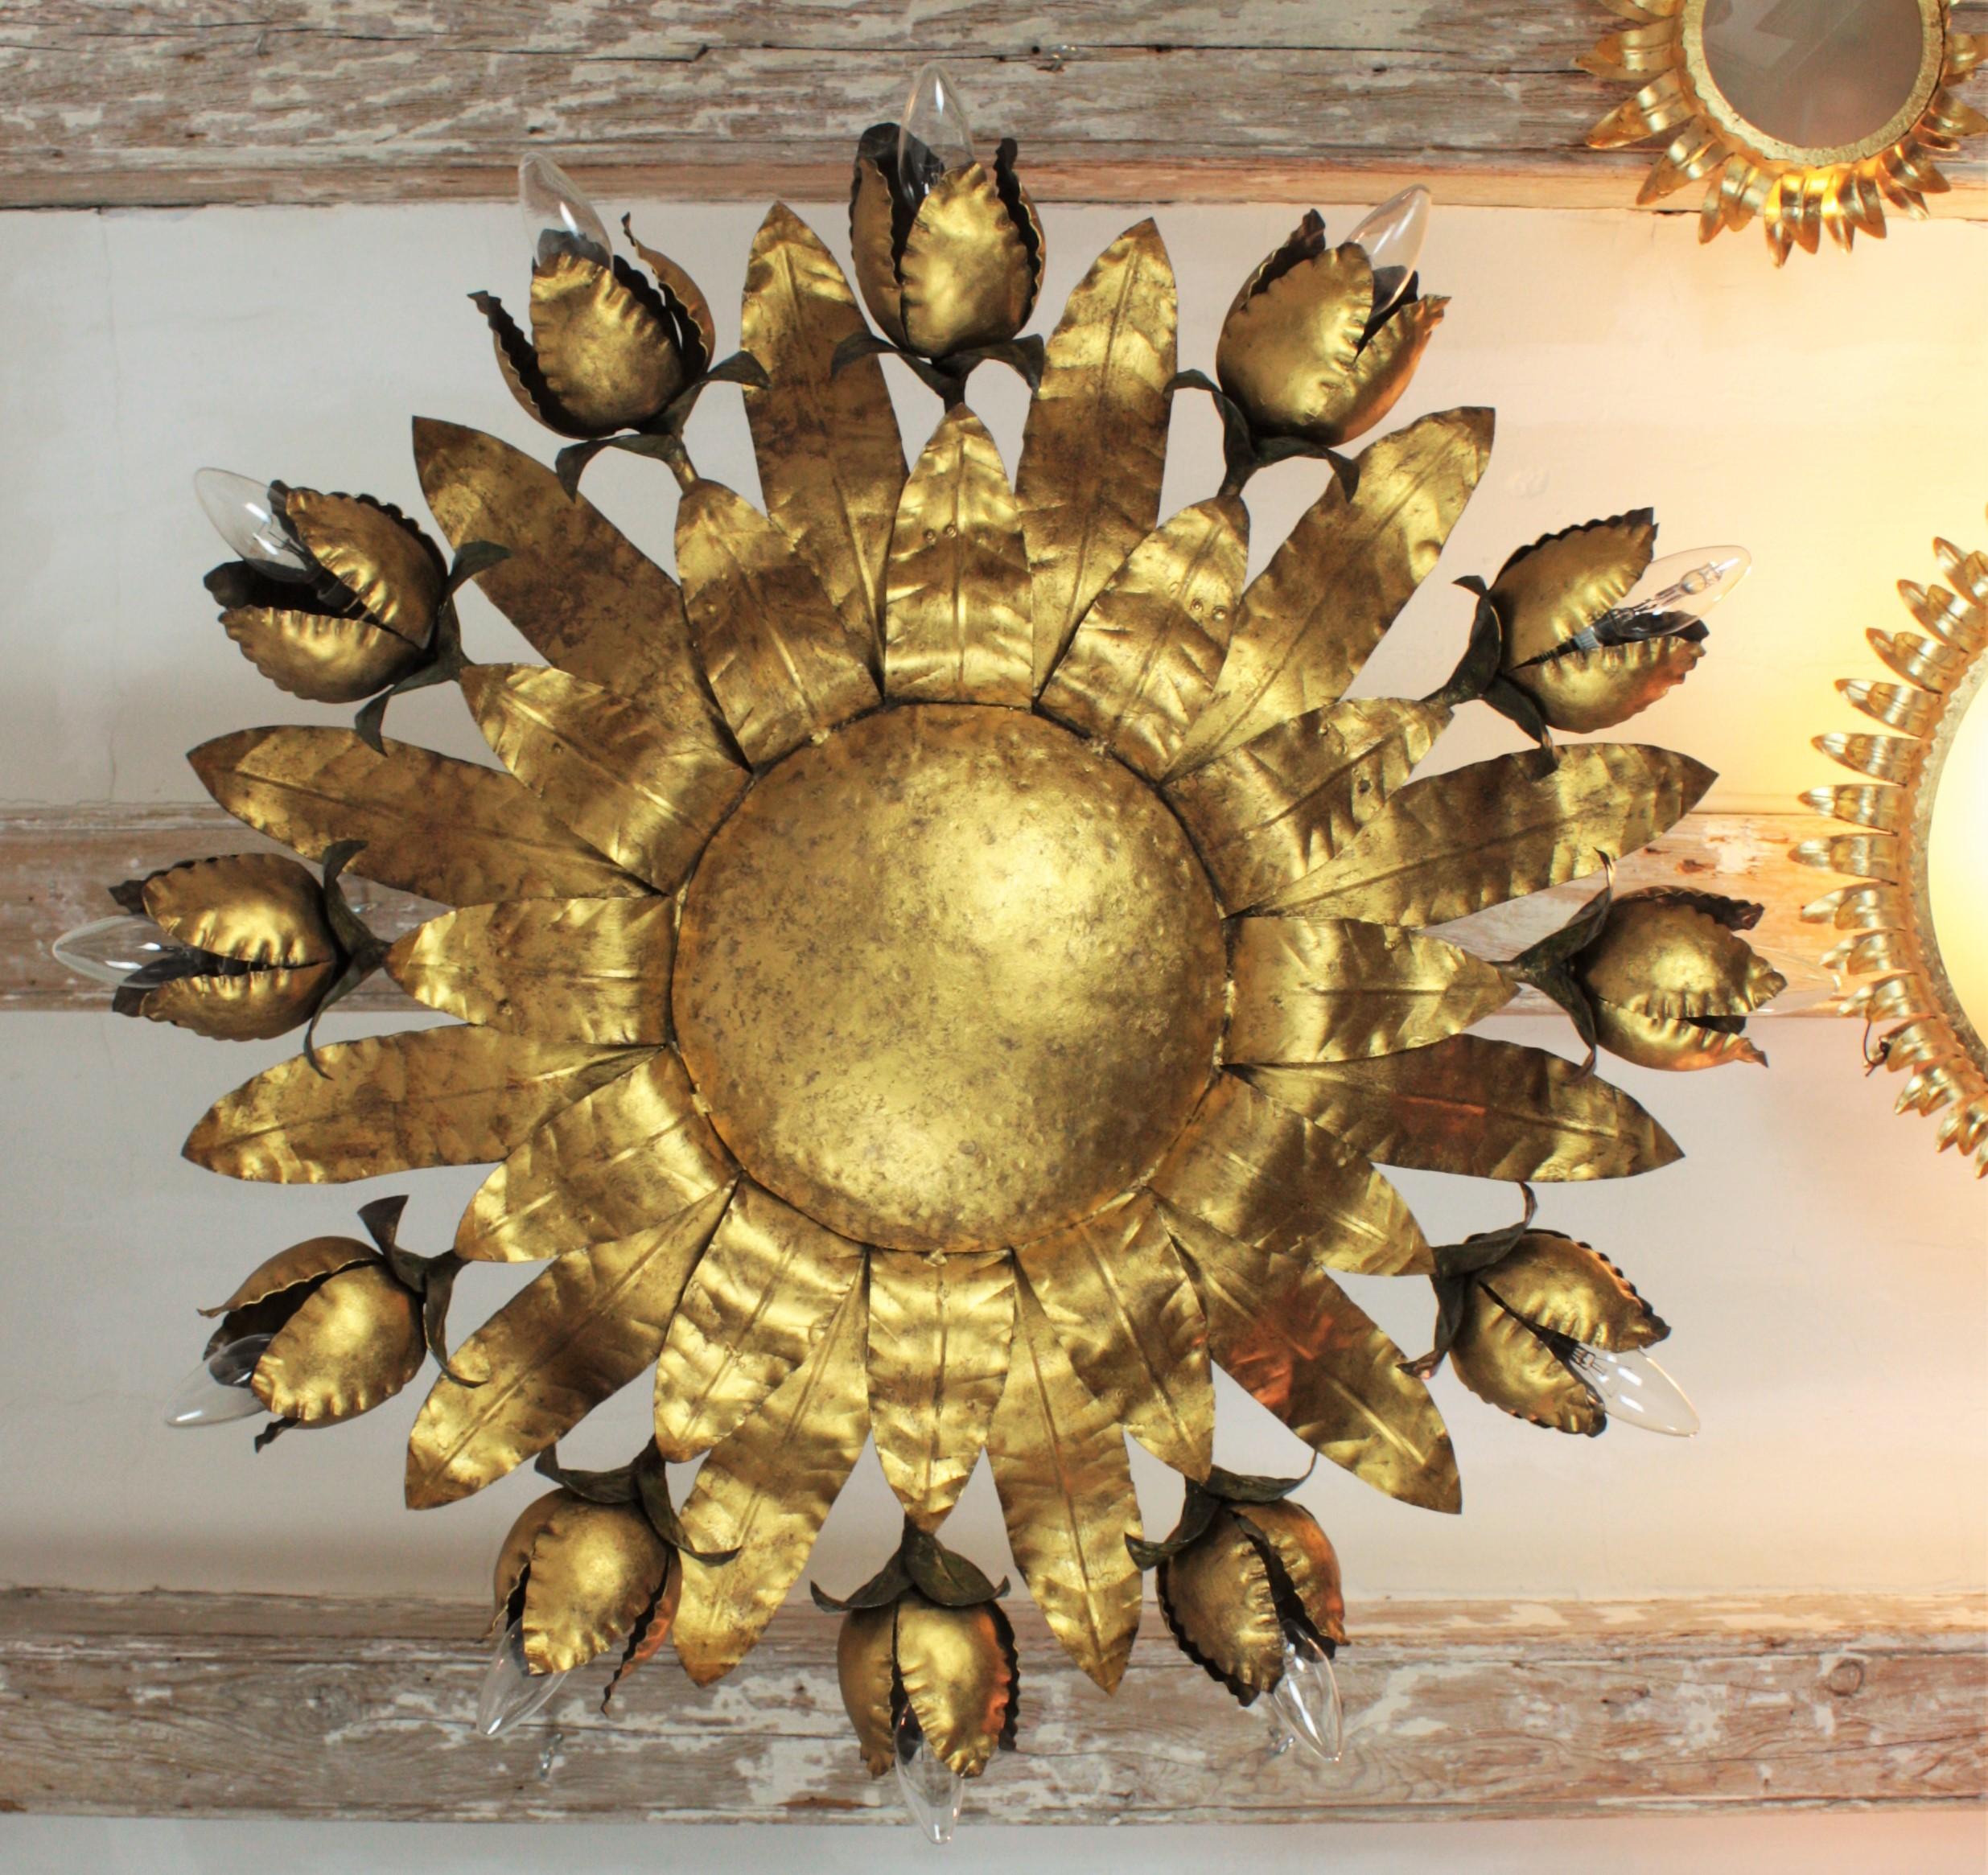 Monumental hand-hammered gold leaf gilt iron floral chandelier or ceiling light fixture with 12 flower bulb holders. An interesting piece due to its size, and its highly decorative effect with handcrafted iron flowers distributed around a central